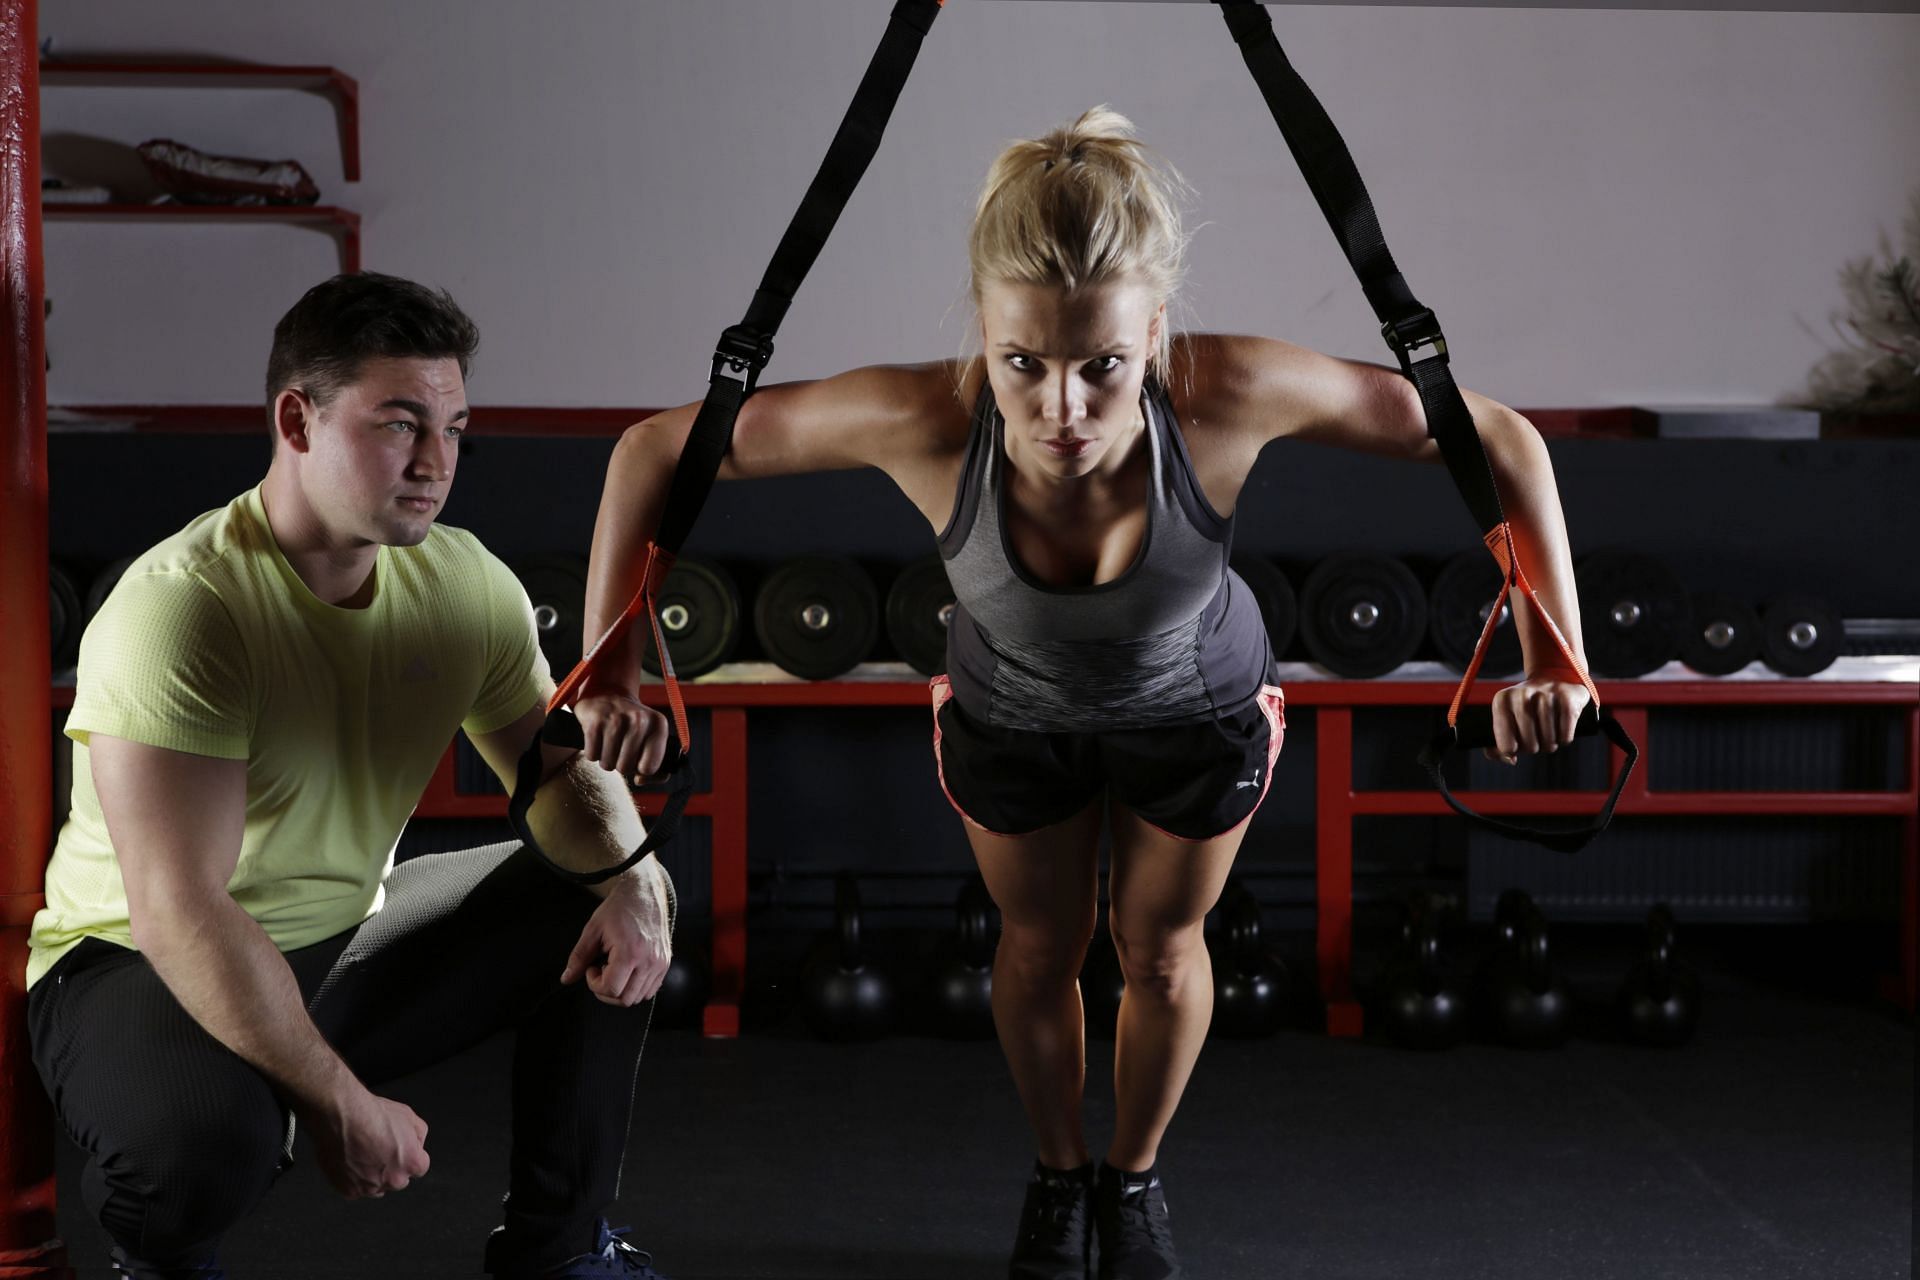 Functional Training: Improving Everyday Movement and Performance (Image via Pexels)